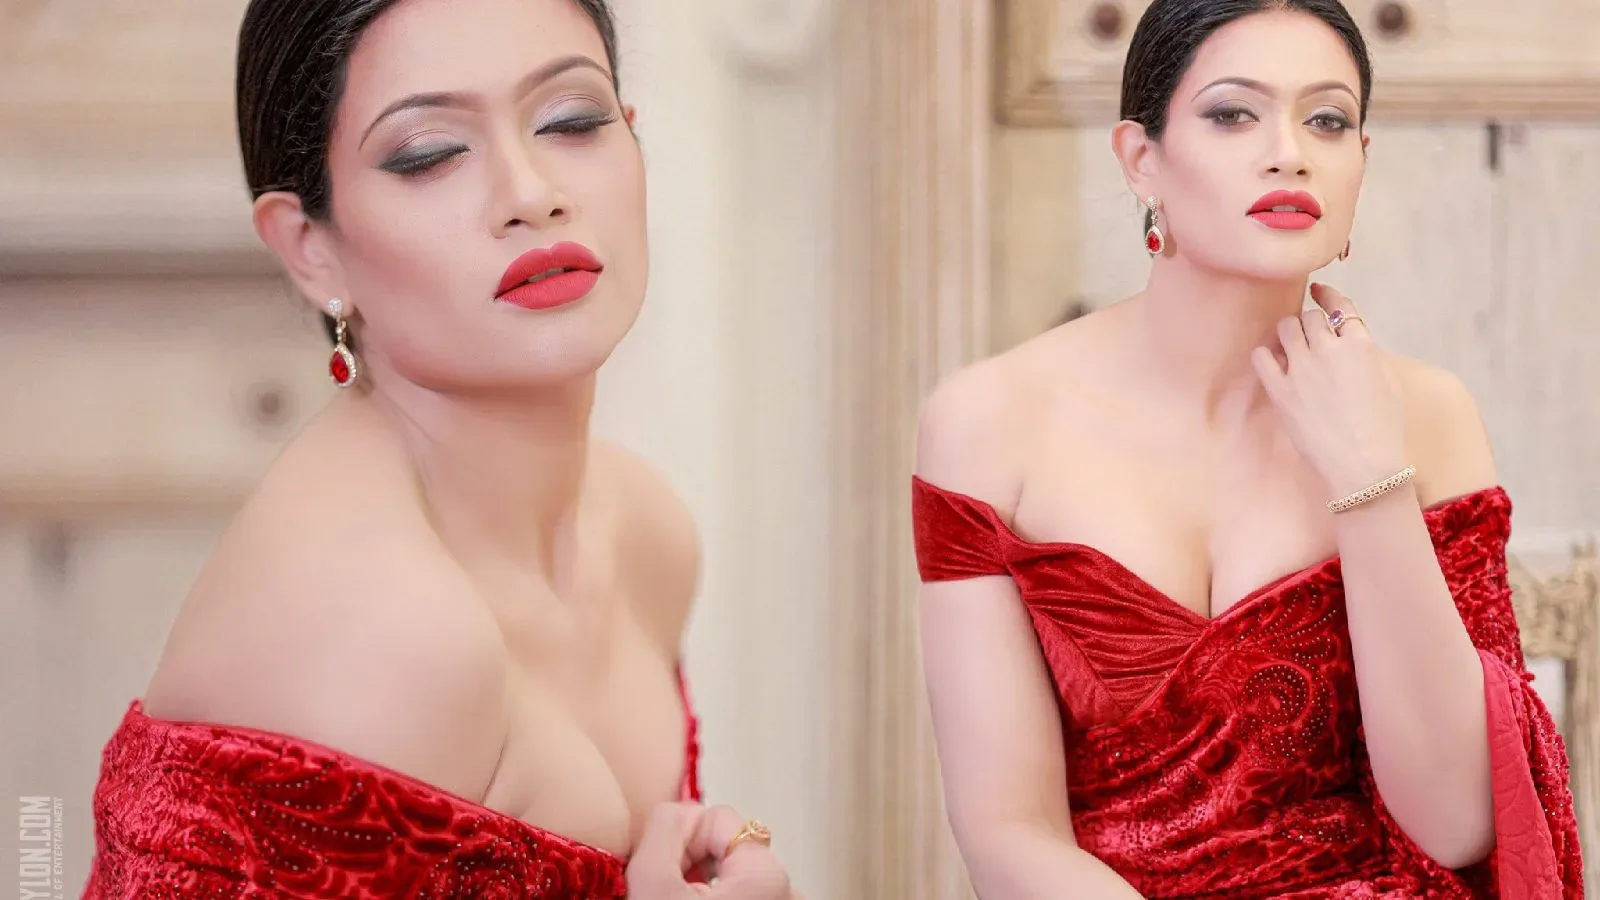 Actress Chulakshi Ranathunga looks extreme hot in the Red